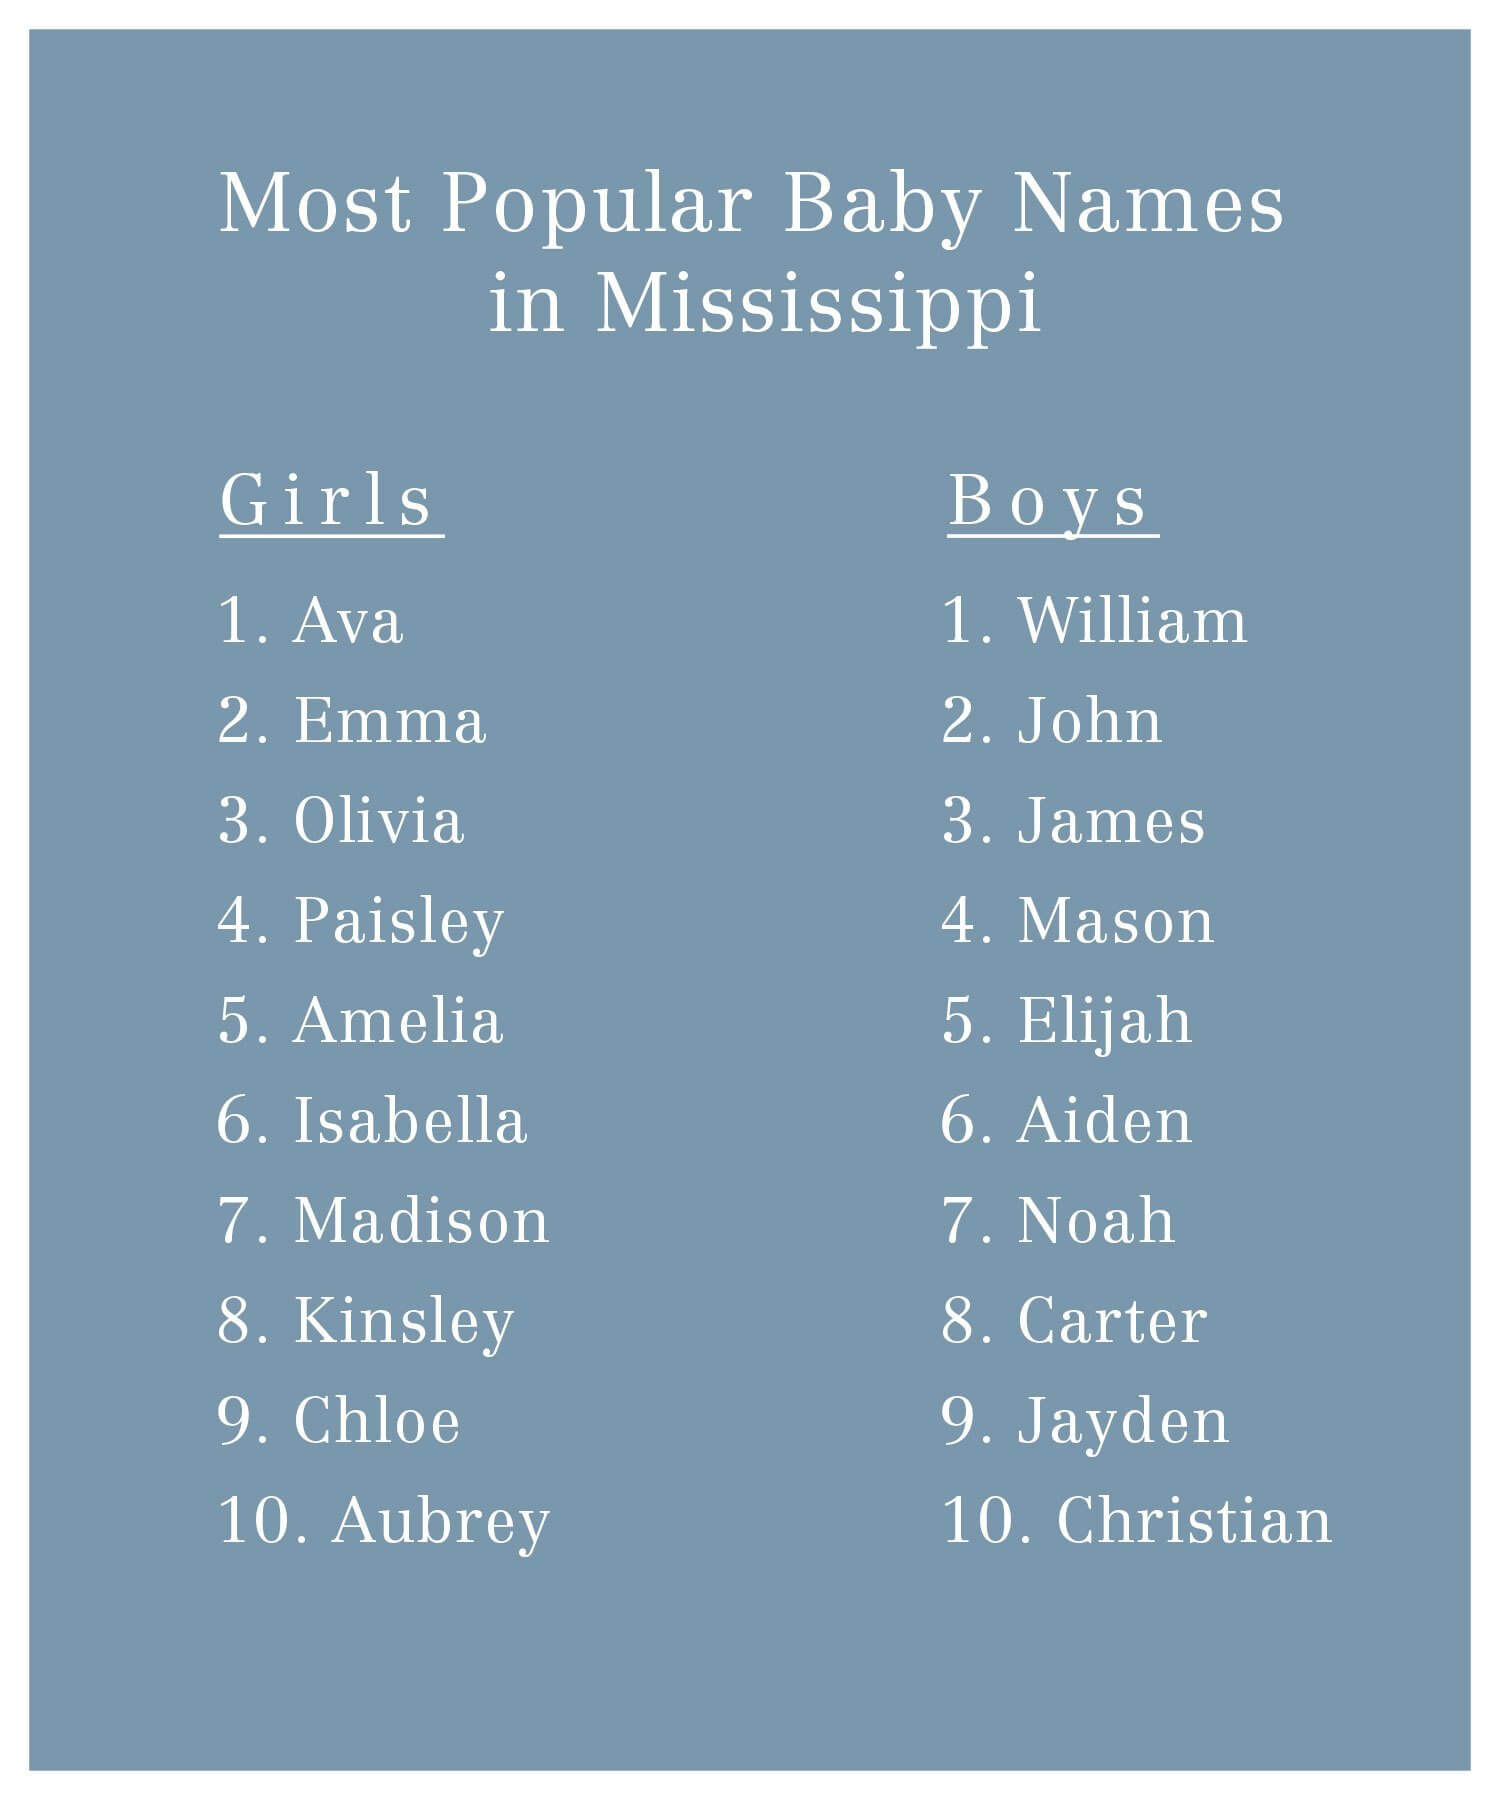 Top 10 Most Popular Baby Names in the South by State
